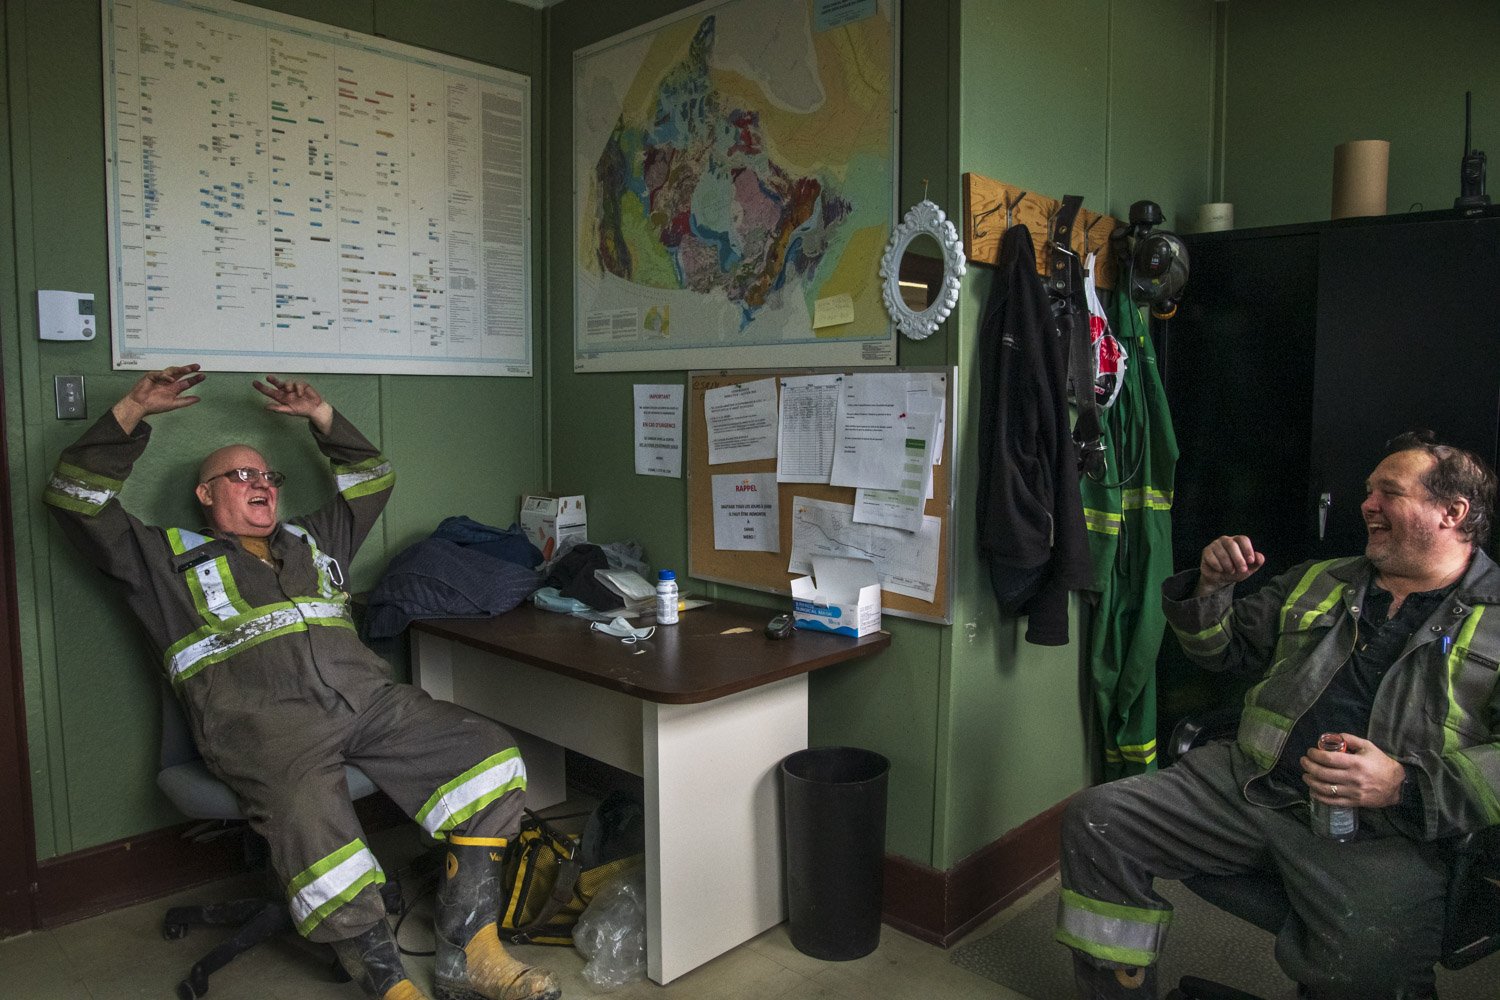  Retired miners Rene Caron and Serge Frenette (right) chat during their lunch break inside an office building of the former Lamaque mine. The mine changed its name to “La Cité de l’Or” when it was converted into an underground tourist attraction in t